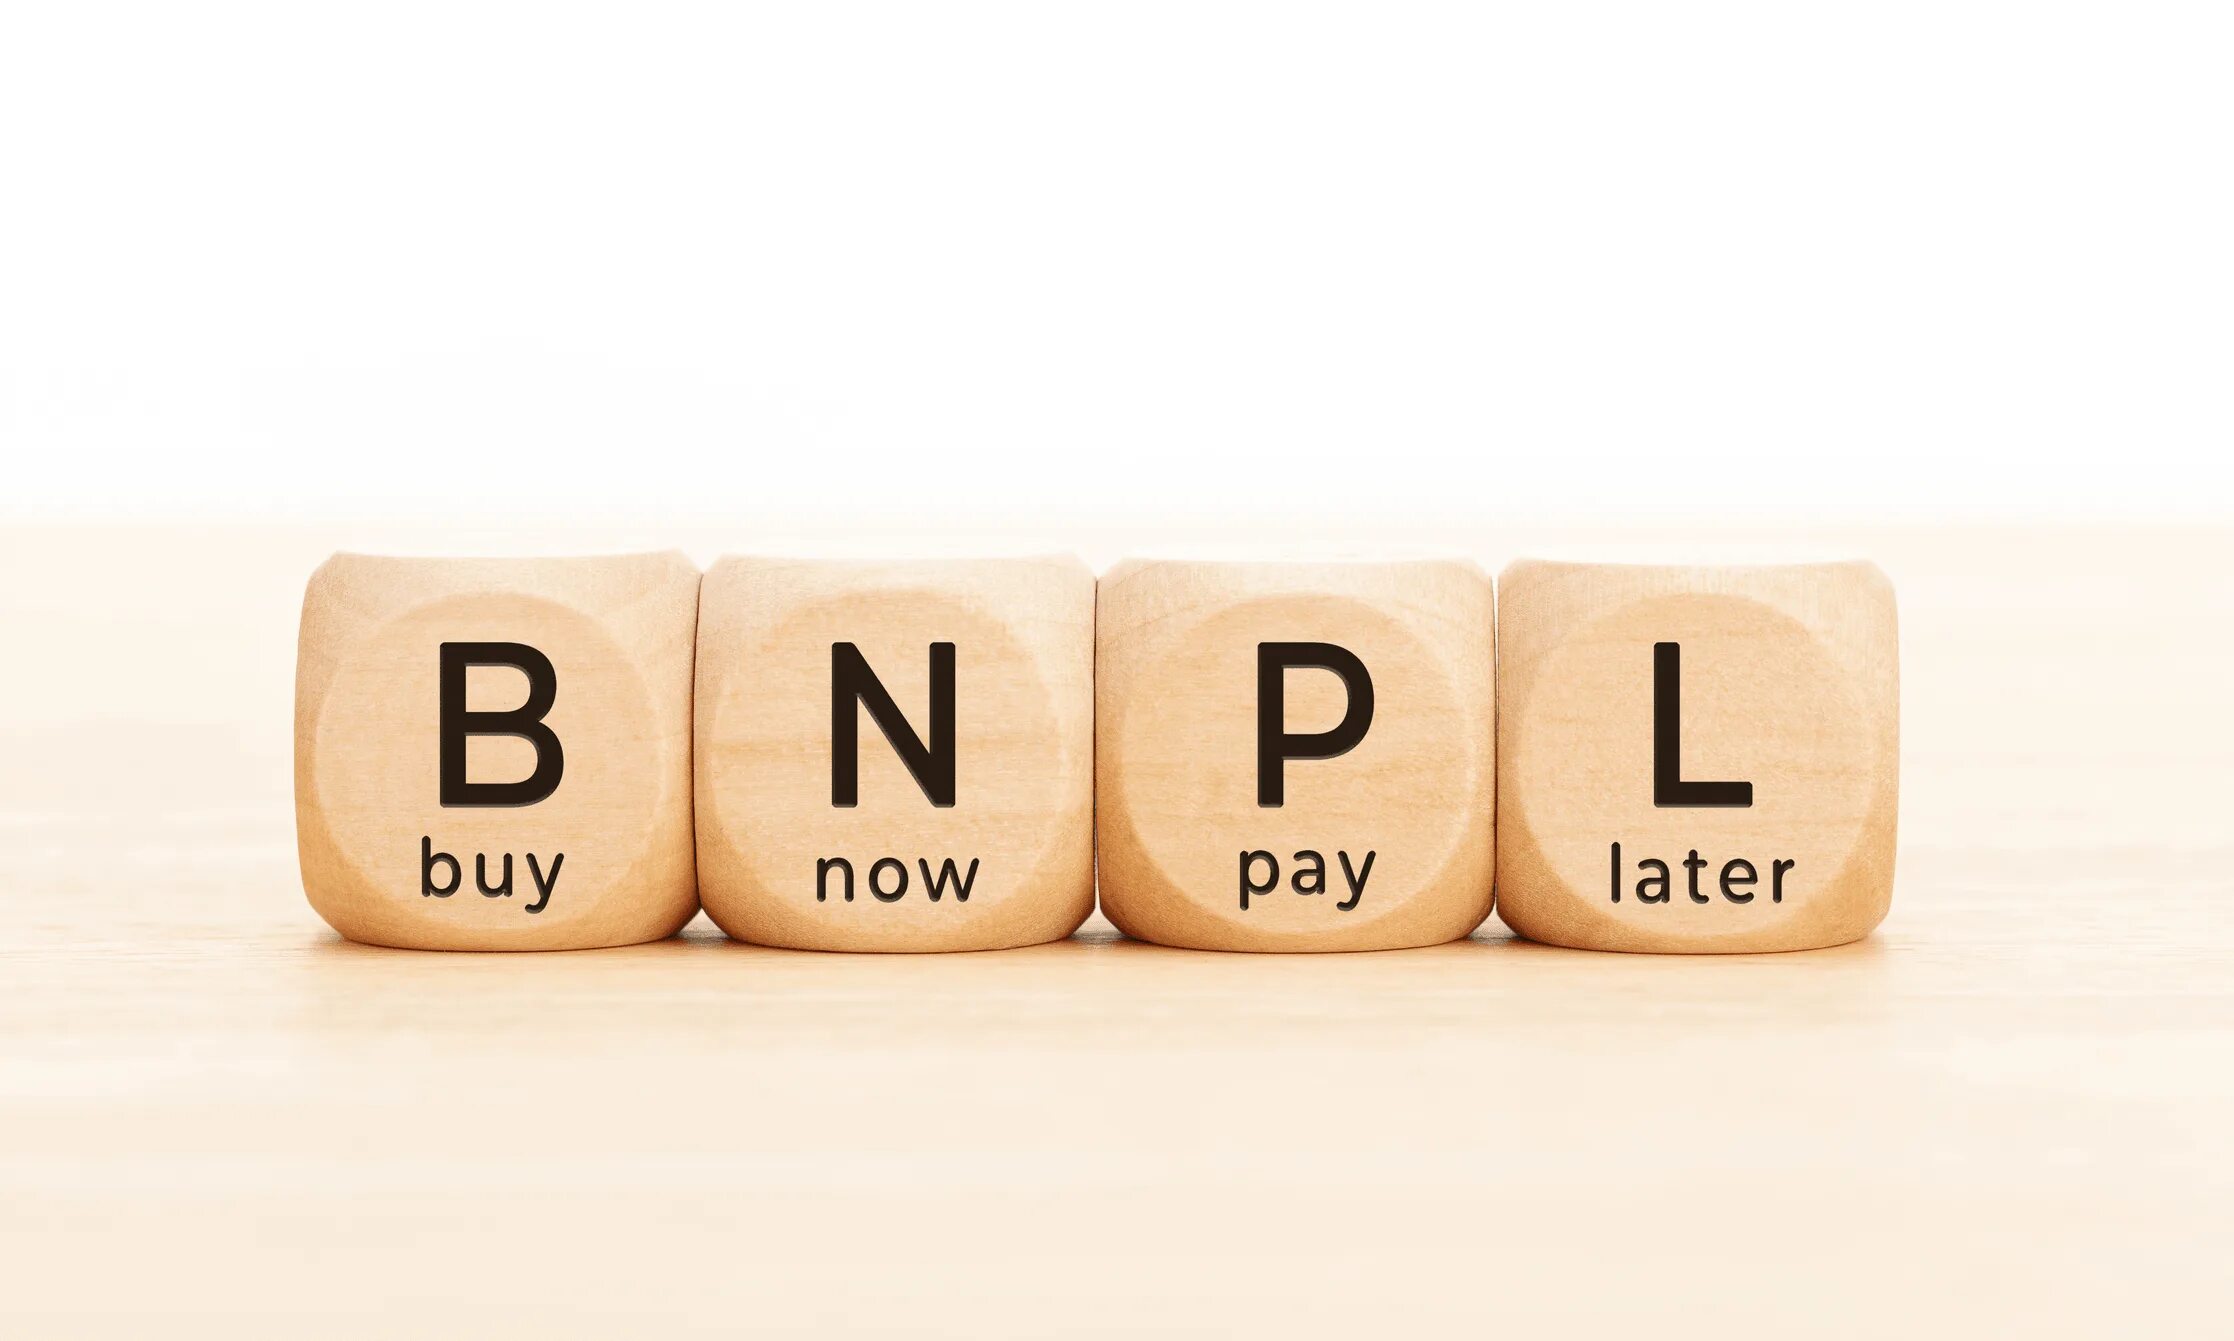 Buy Now pay later. BNPL. Buy Now pay later photo. Картинки BNPL-сервис.